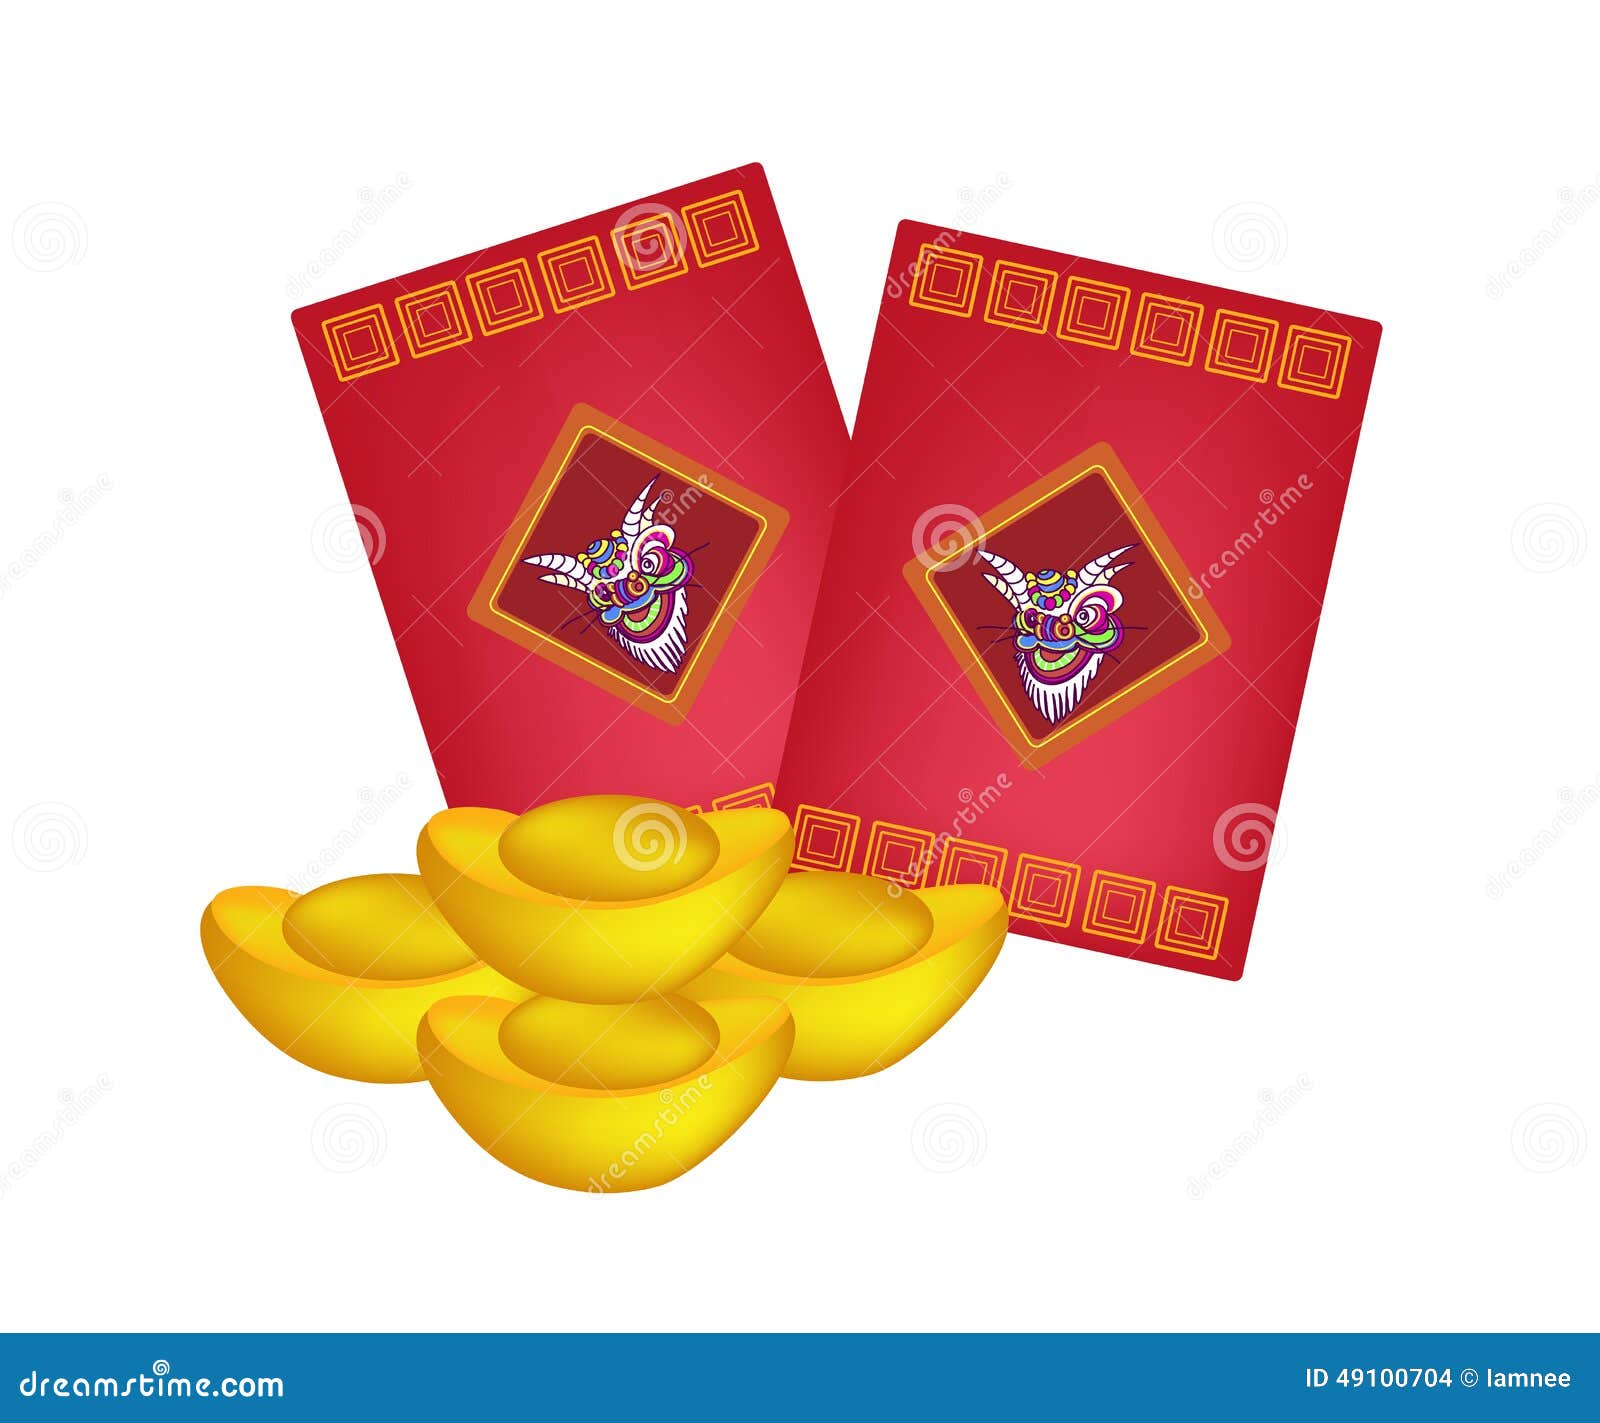 Red Envelopes And Gold Ingots For Chinese New Year Stock Vector - Image